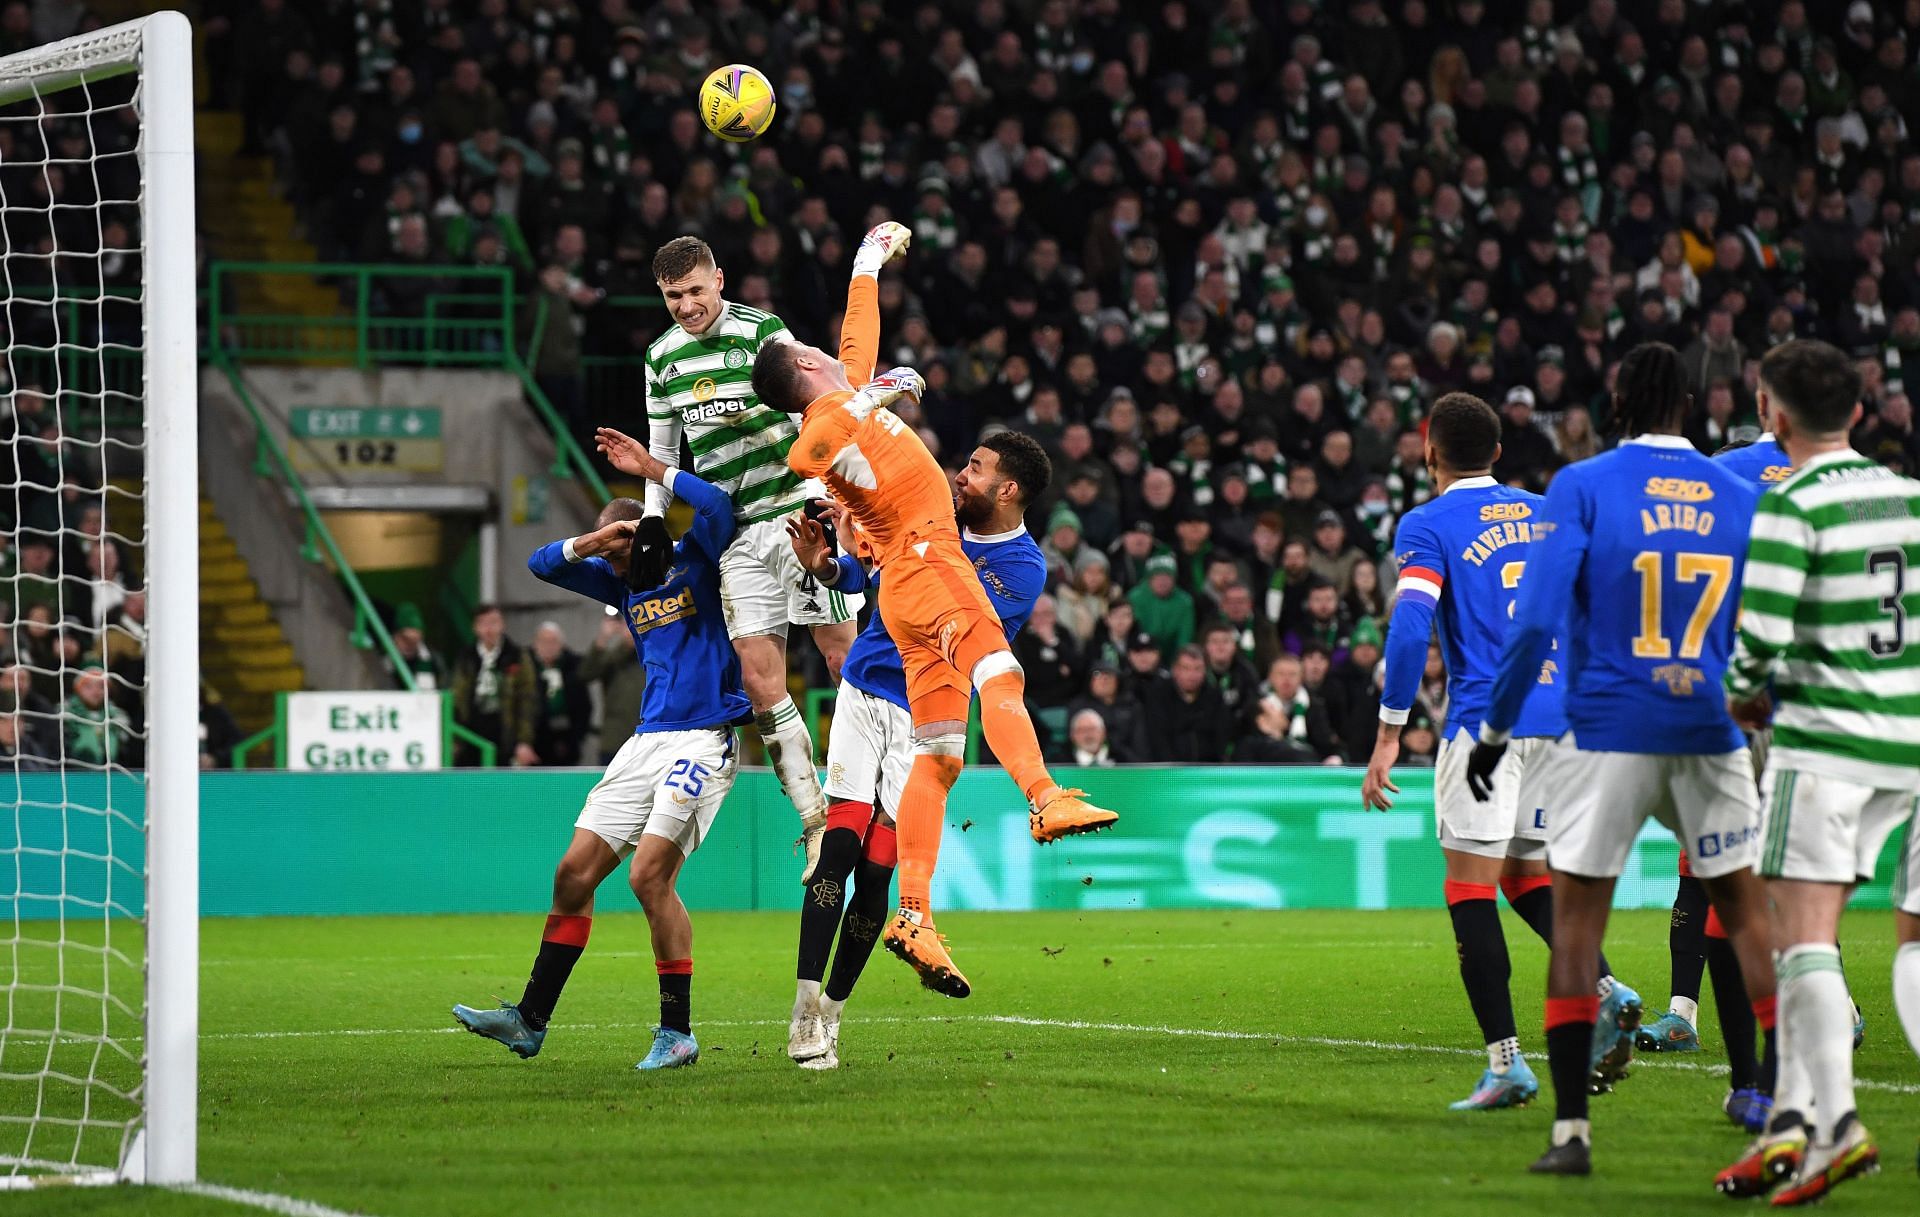 Rangers and Celtic clash in a high-profile fixture on Sunday